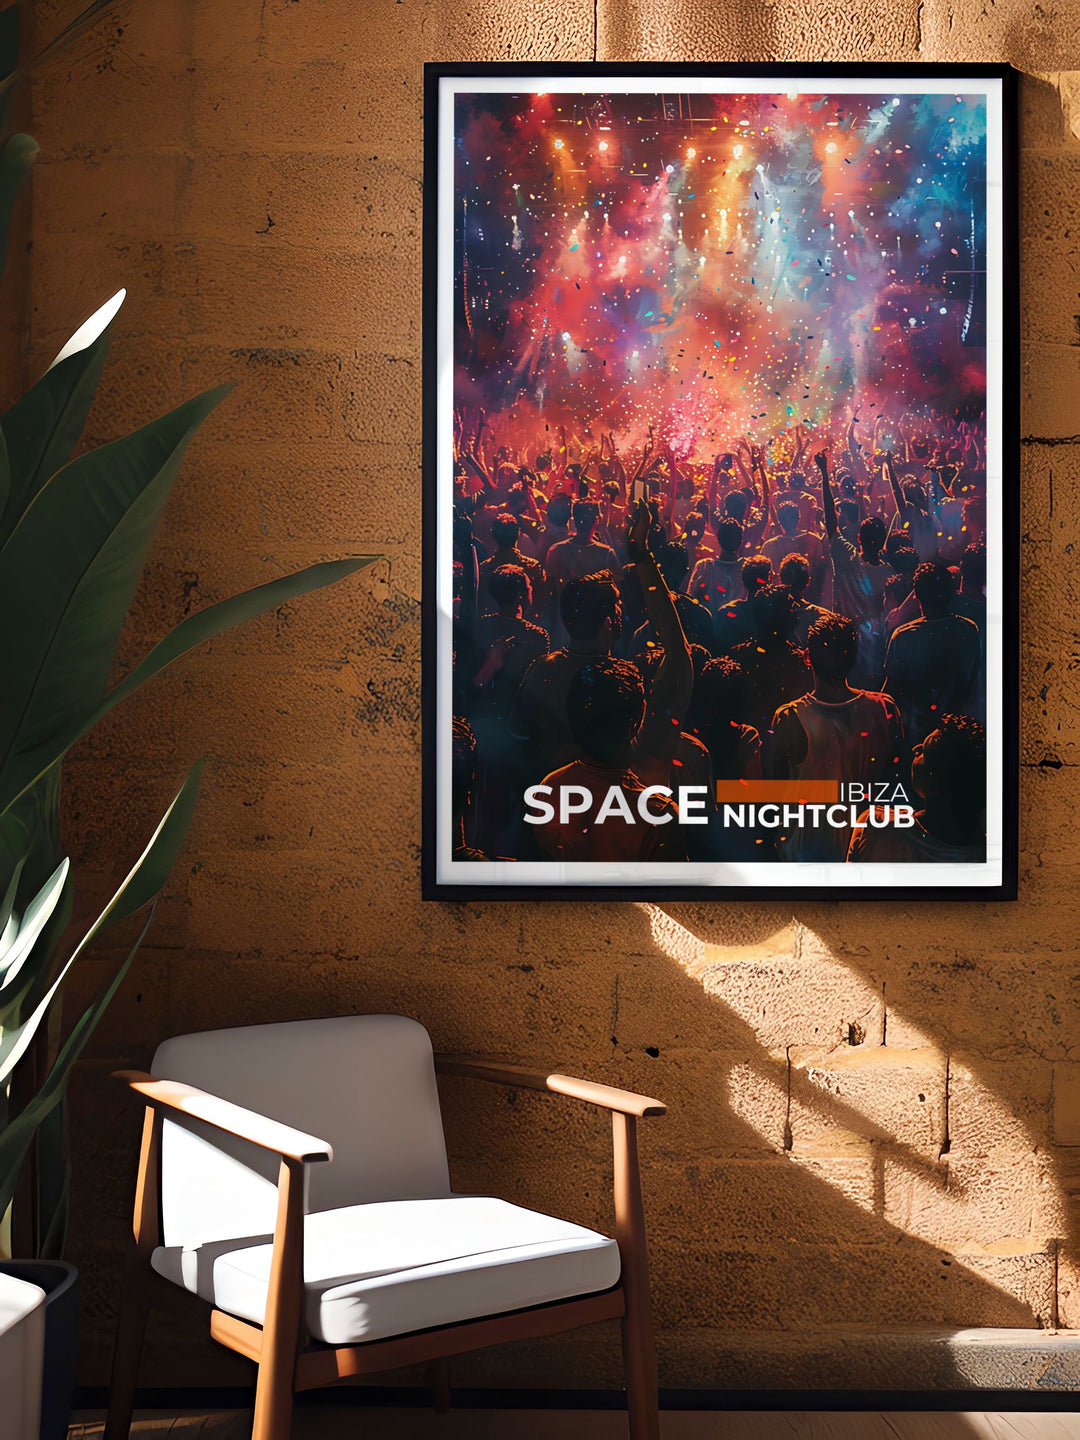 Space Nightclub wall art, celebrating the iconic venues contribution to electronic dance music and Ibiza nightlife.